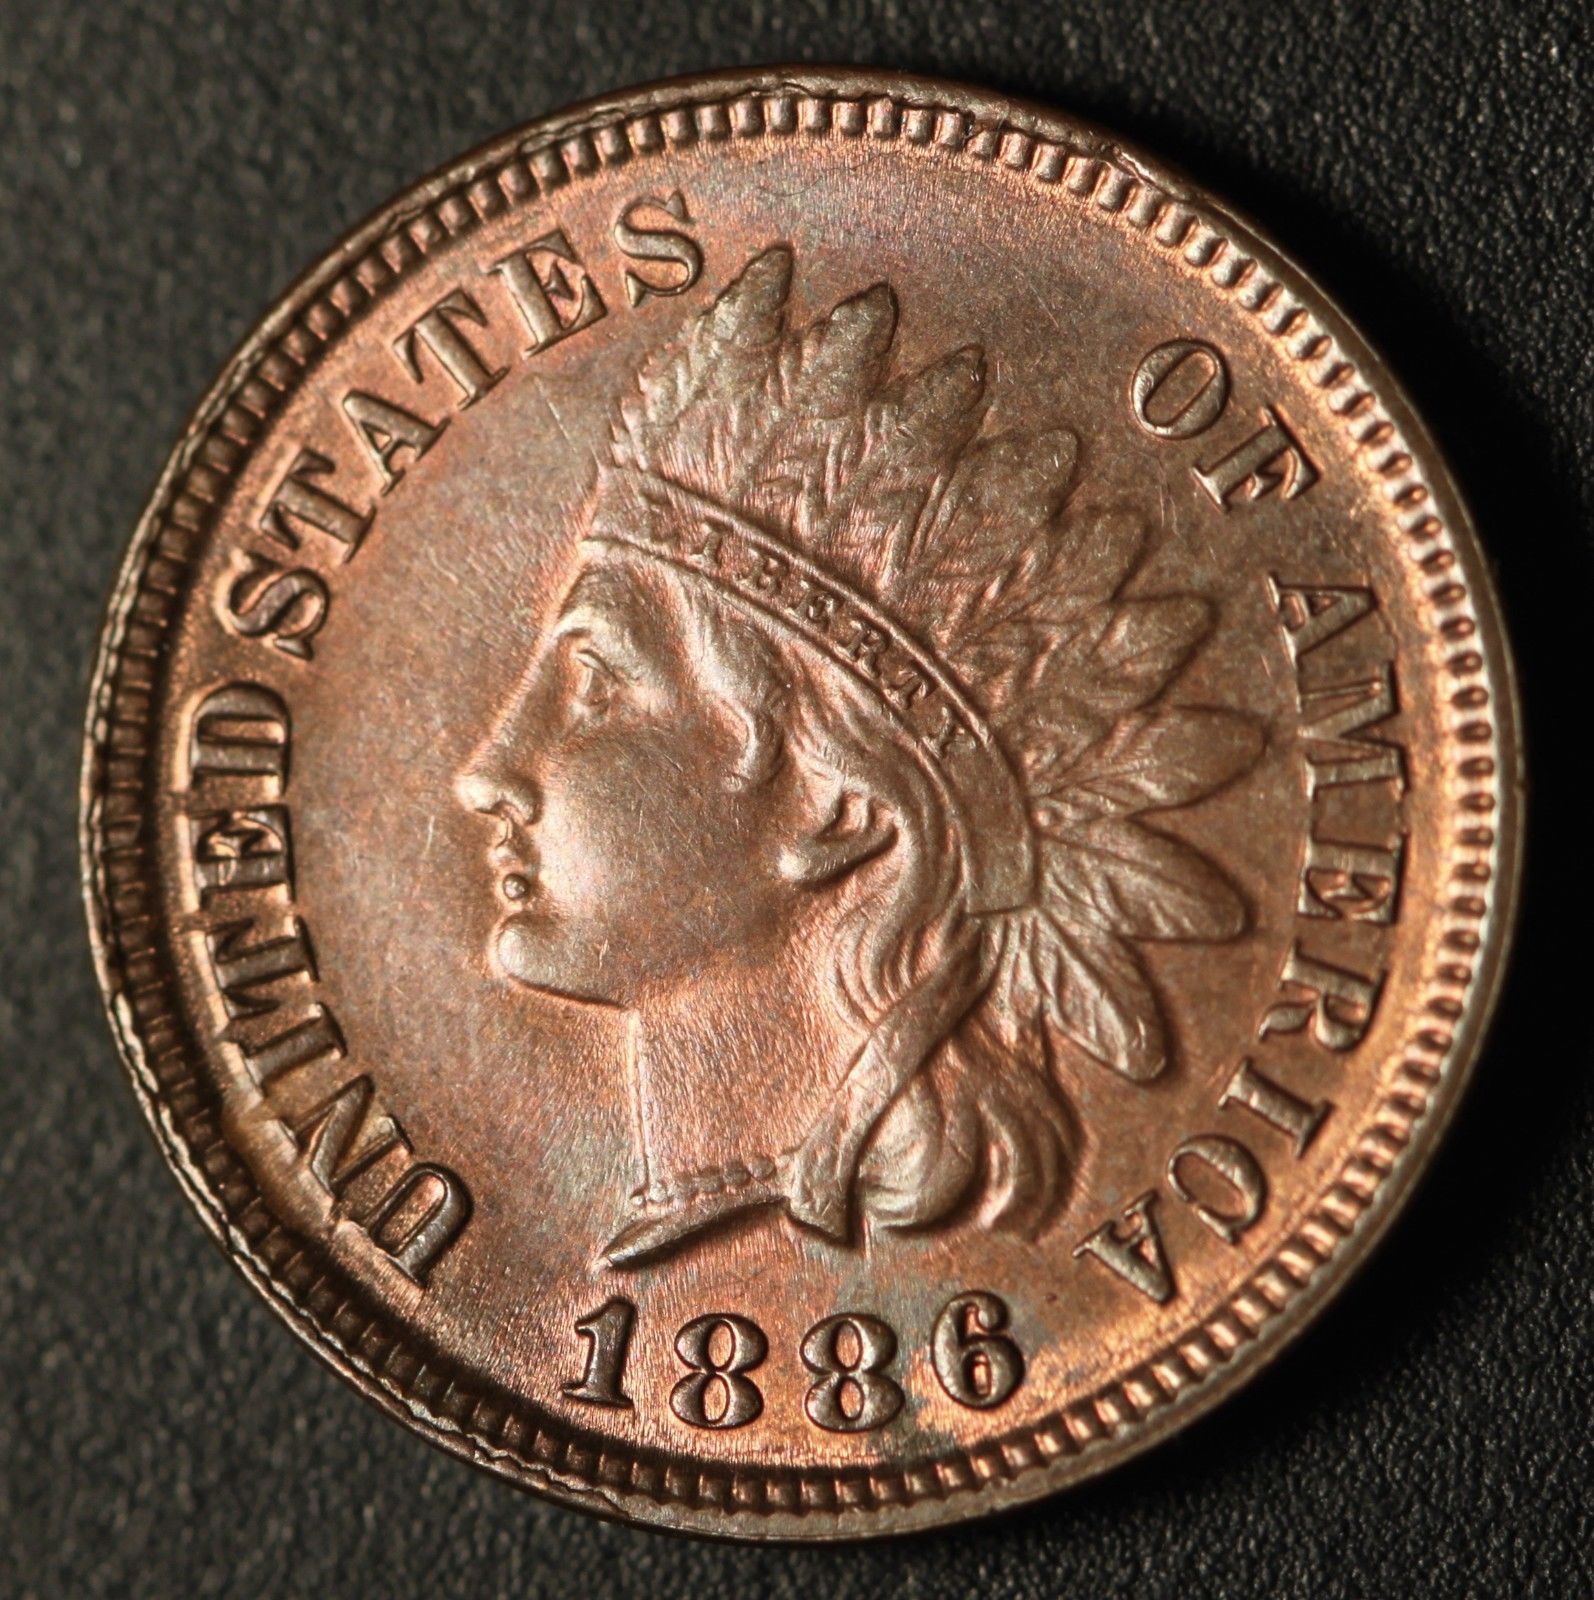 1886 RPD-006 - Indian Head Penny - Photo by Ed Nathanson